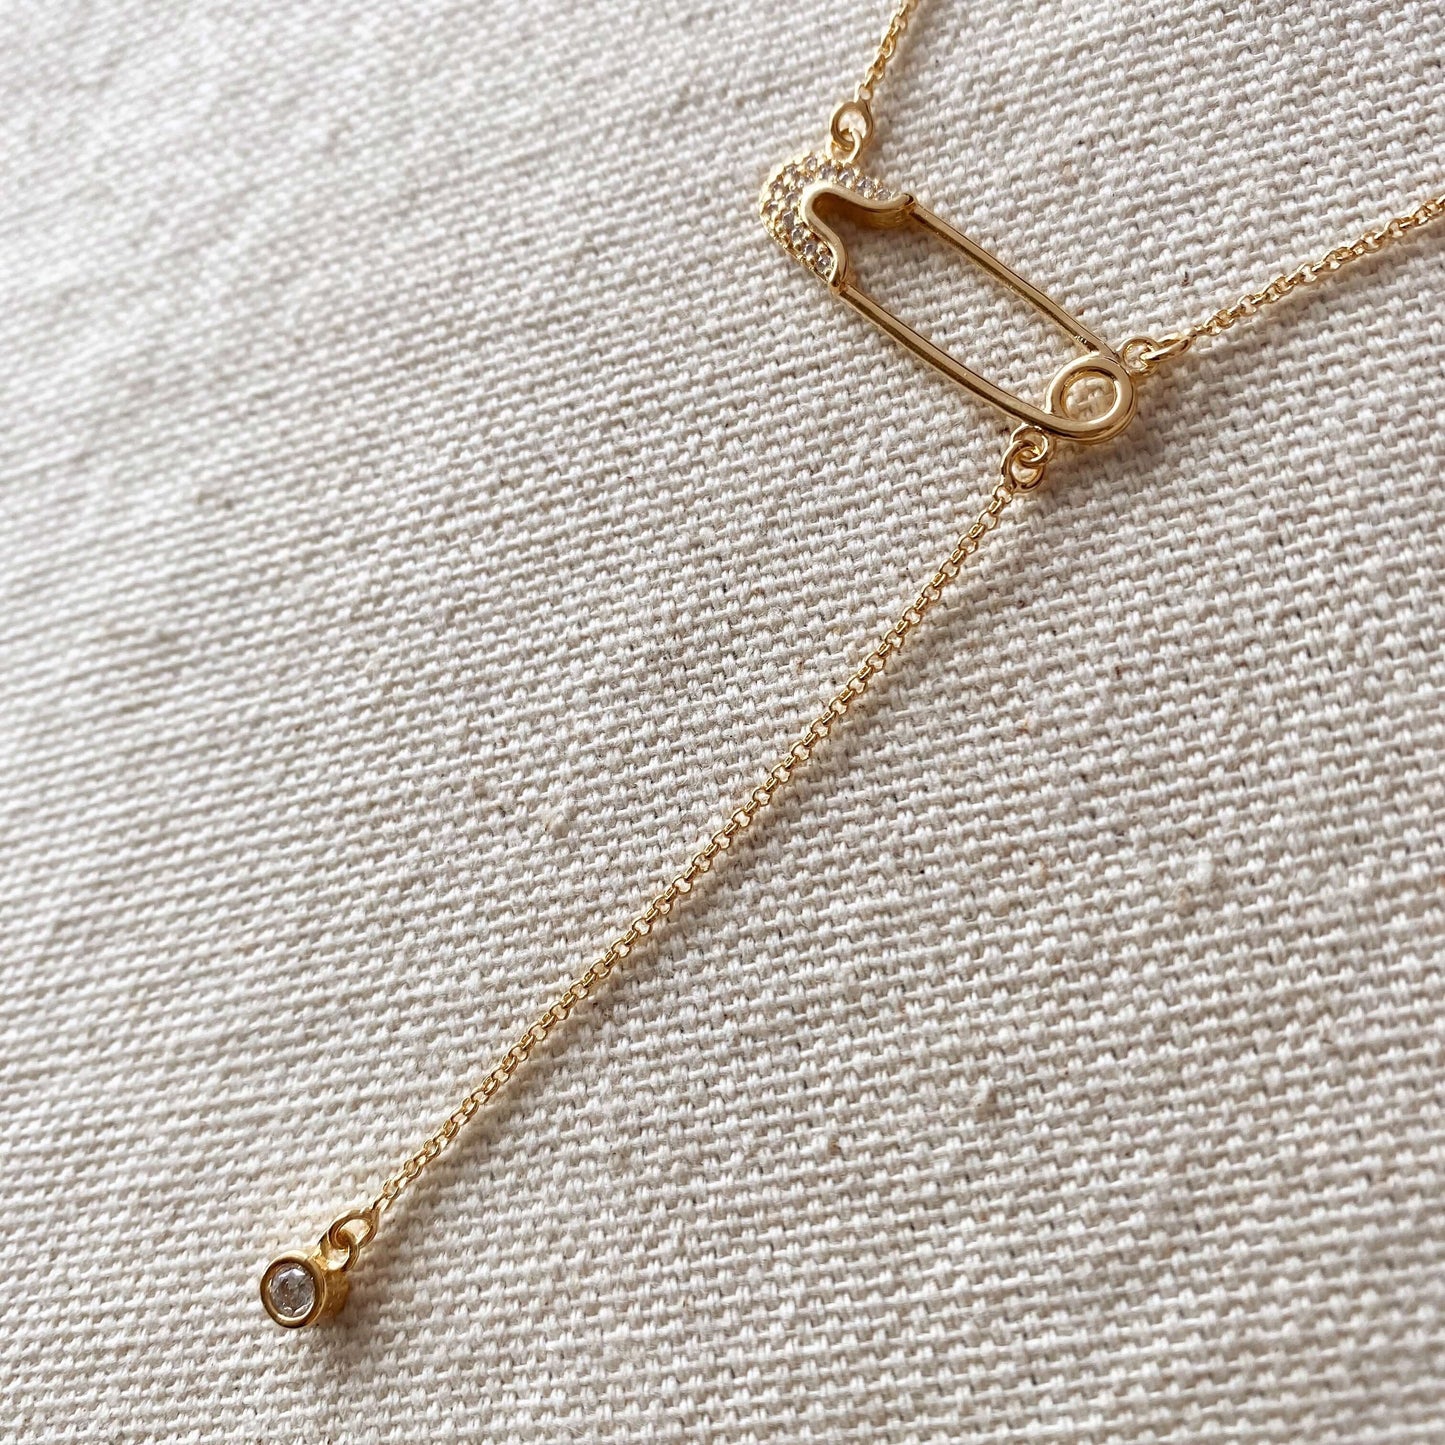 GoldFi 18k Gold Filled Safety Pin Necklace Featuring Cubic Zirconia Accents